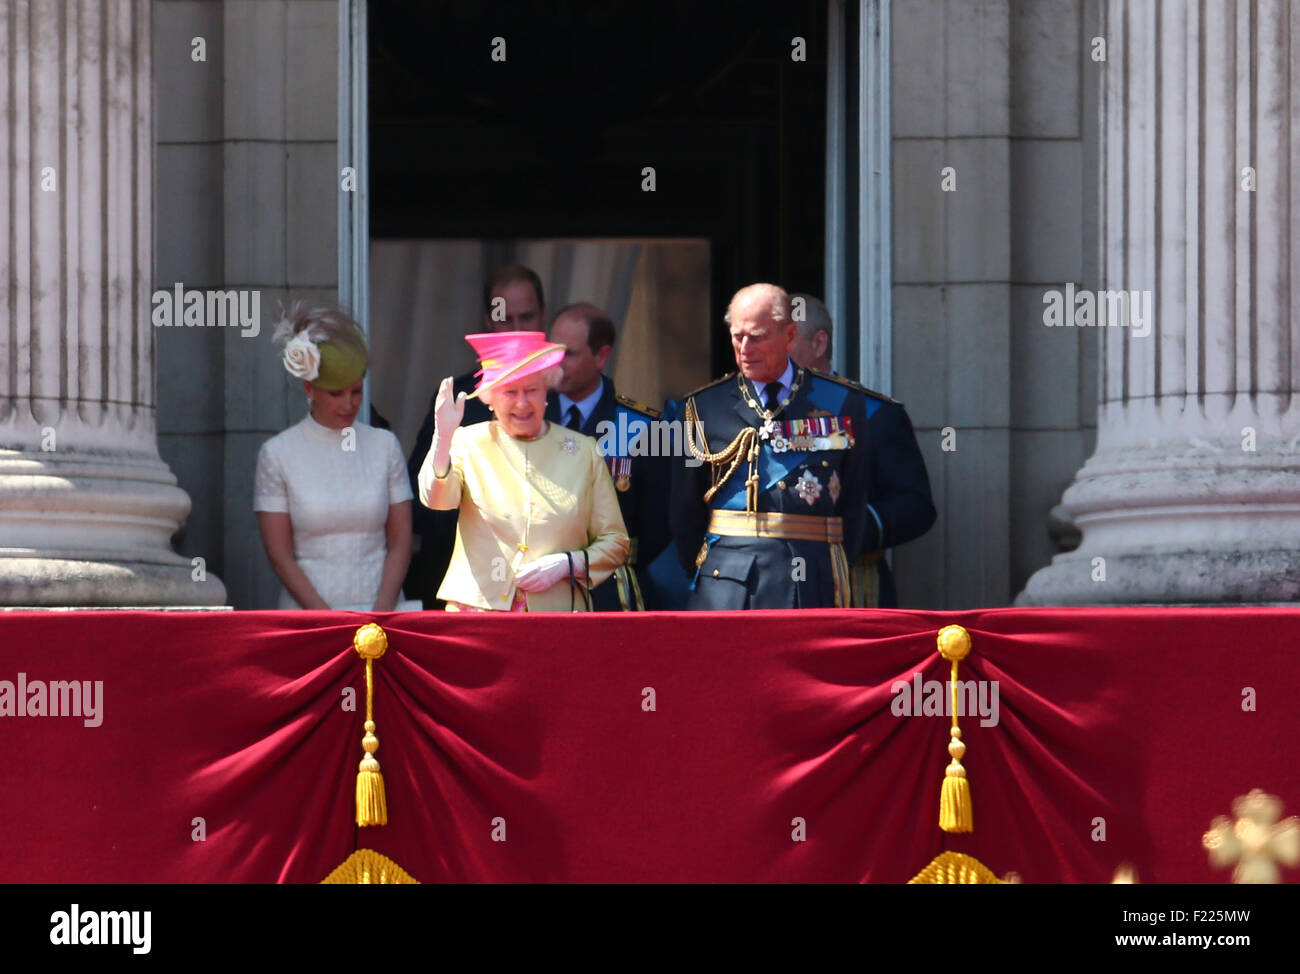 Members of the Royal Family appear on the balcony of Buckingham Palace for a flypast of the Battle of Britain Memorial Flight to commemorate the 75th anniversary of the beginning of the Battle of Britain  Featuring: Sophie, Countess of Wessex, Queen Elizabeth II, Prince Philip, Duke of Edinburgh Where: London, United Kingdom When: 10 Jul 2015 Stock Photo